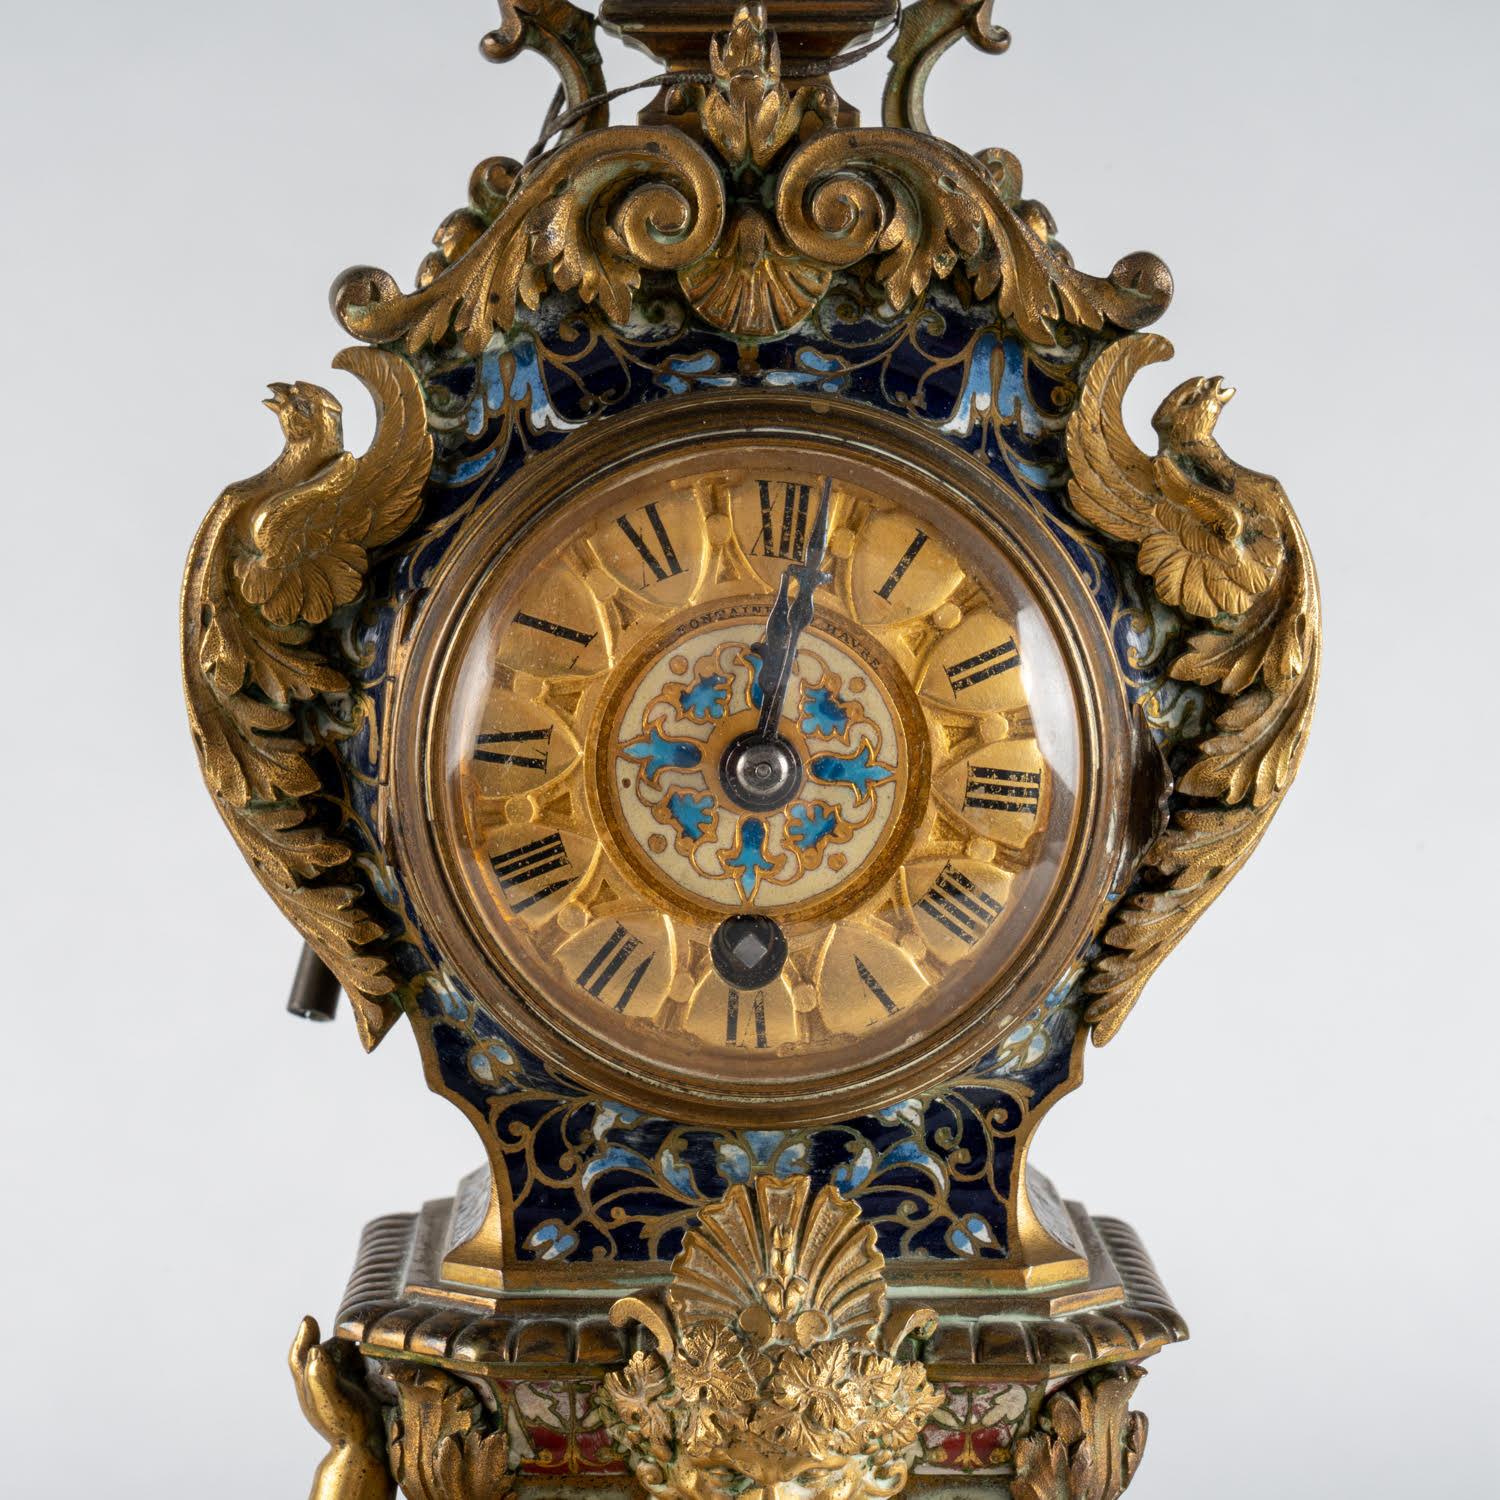 Mantelpiece from the 19th century, Napoleon III period.

Clock and its two candelabras in gilt bronze, enamels and onyx, beautiful work of the 19th century, Napoleon III period, (mechanism in need of restoration).    
Clock: h: 34cm, w: 10.5cm, d: